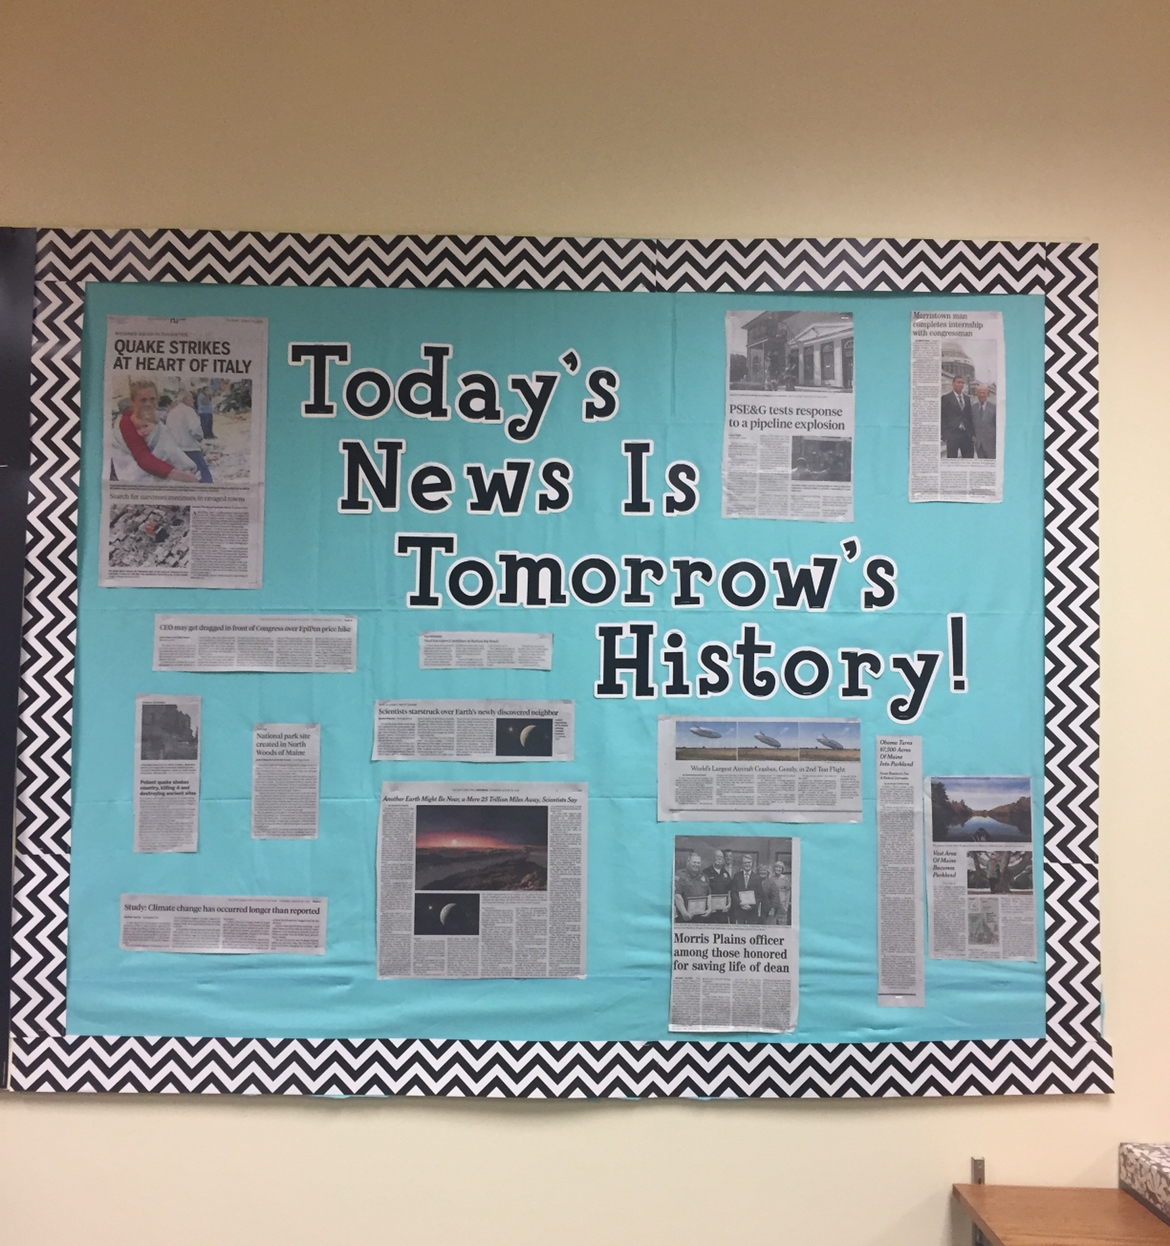 A bulletin board says Today's News is Tomorrow's History and has newspaper clippings on it.